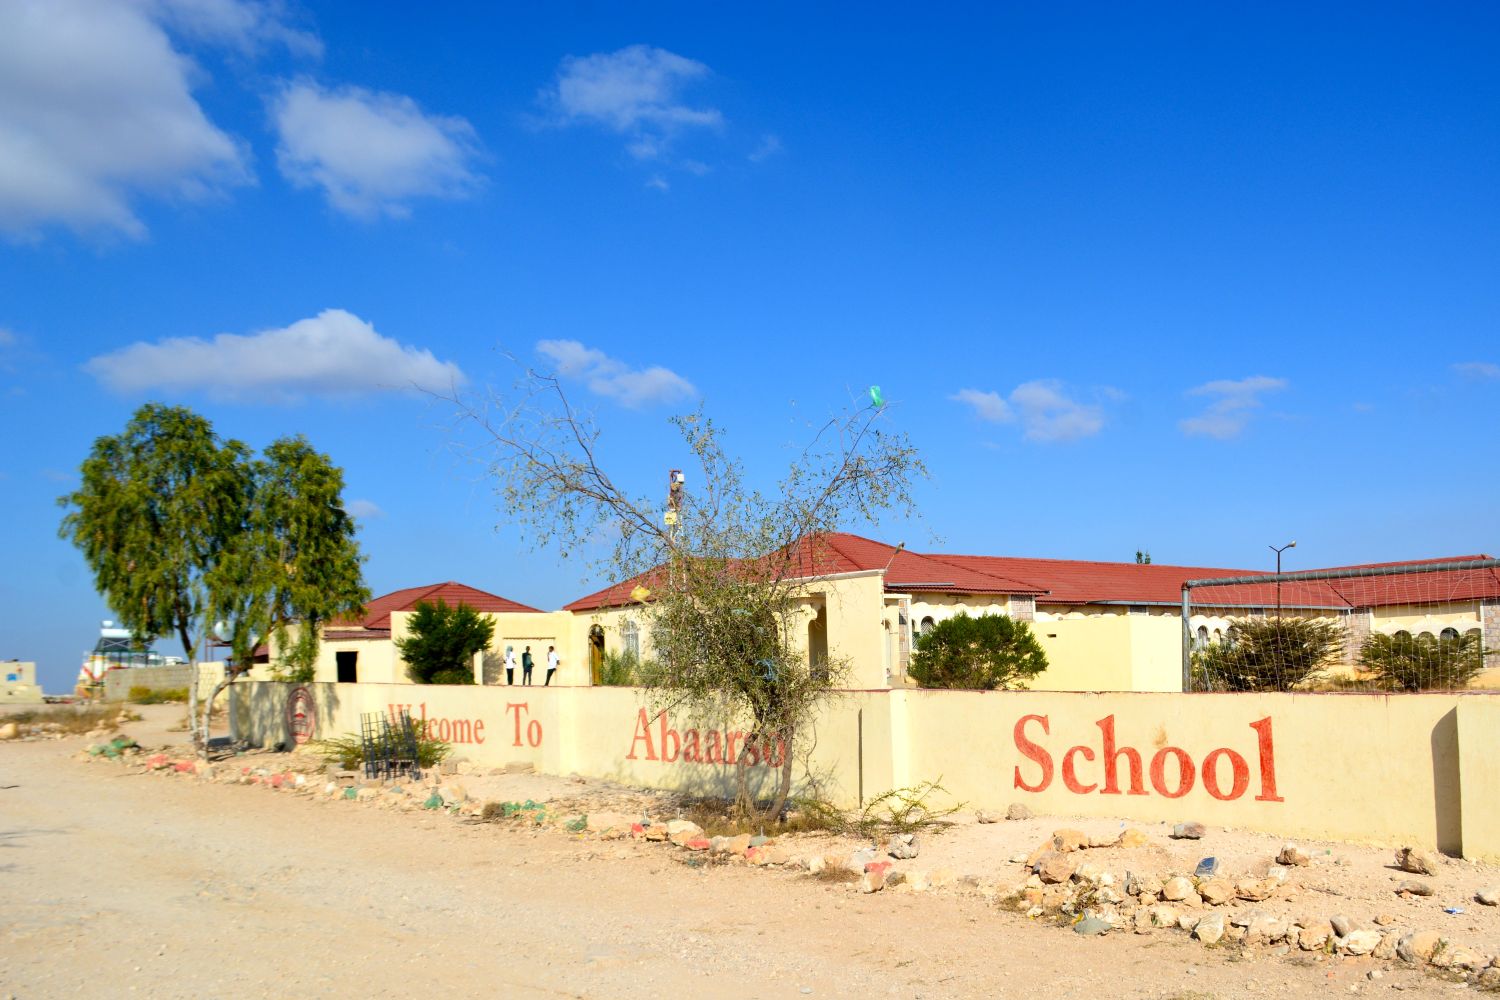 View of a wall with the words "Welcome to Abaarso School"